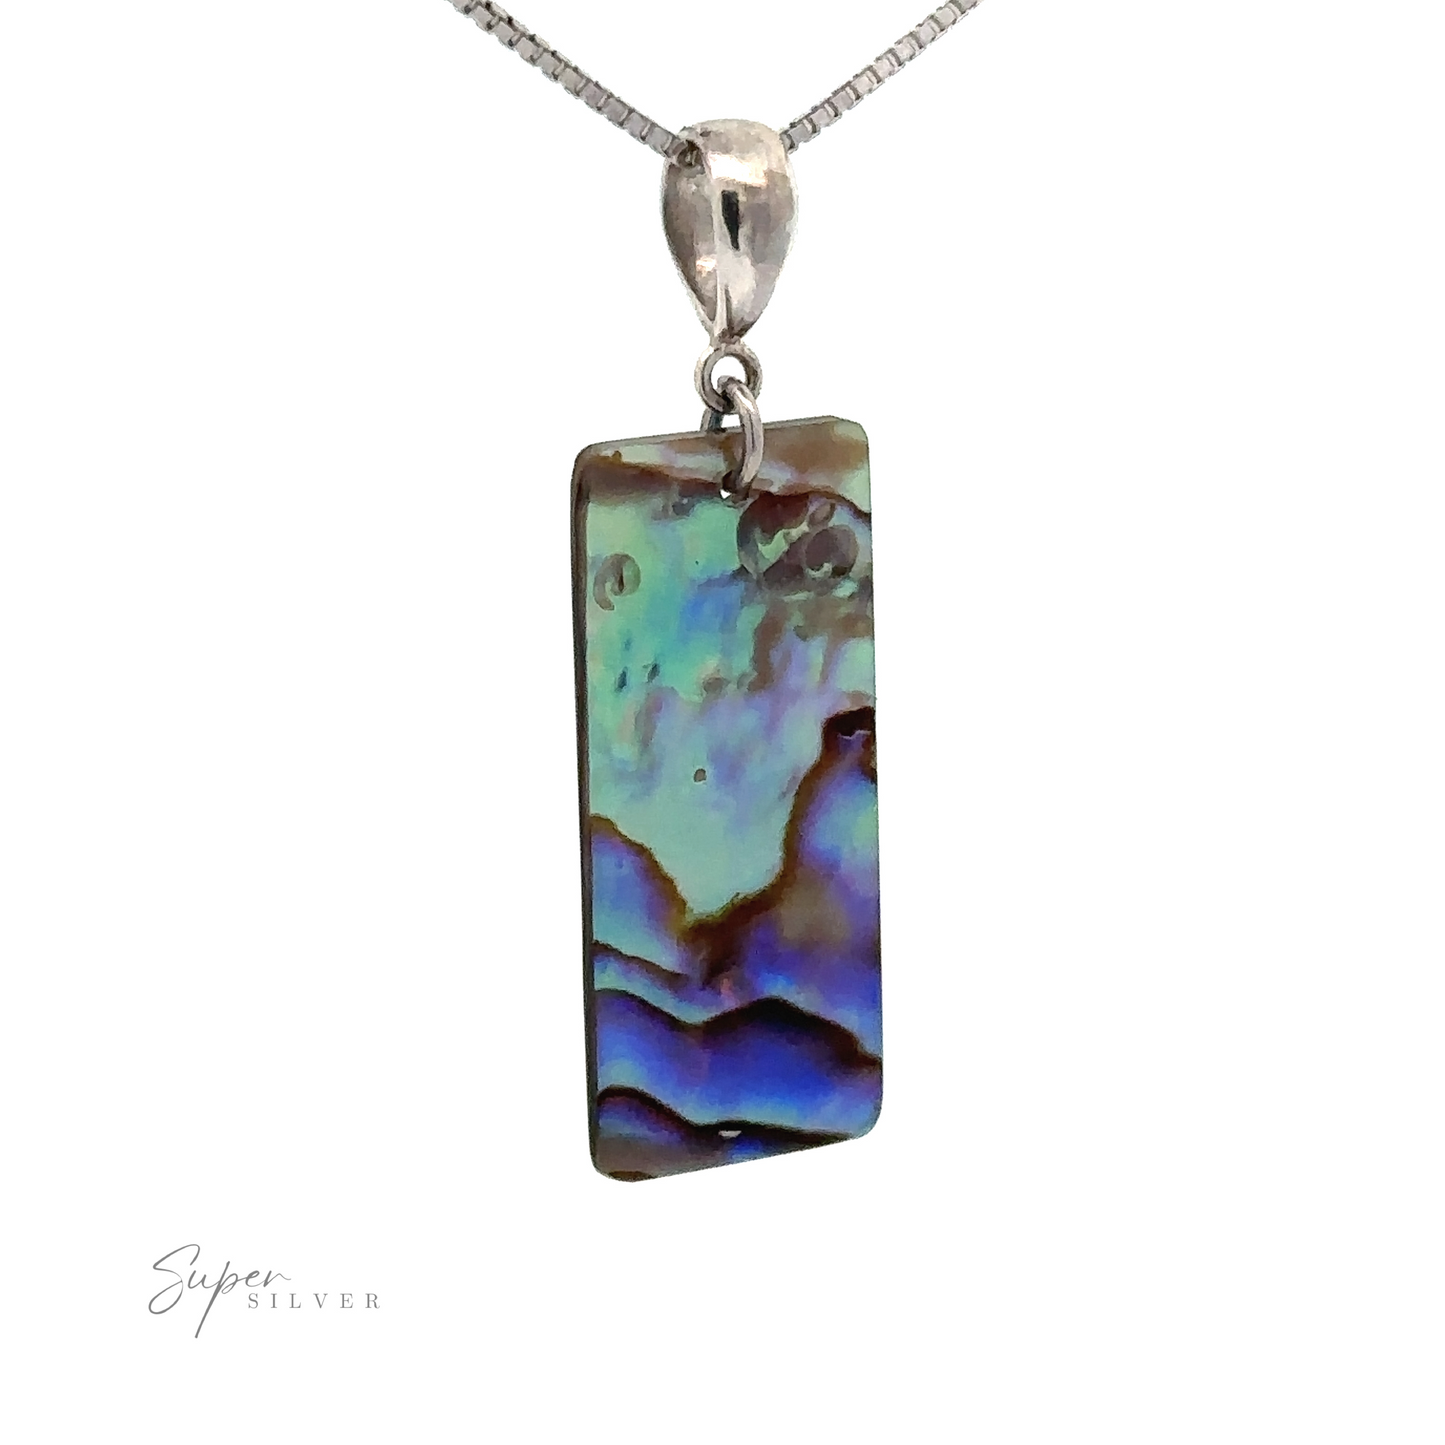 
                  
                    A handmade Rectangular Abalone Slab Pendant with a multicolored, iridescent surface hangs from a silver chain against a white background. The "Super Silver" logo is visible in the bottom left corner.
                  
                